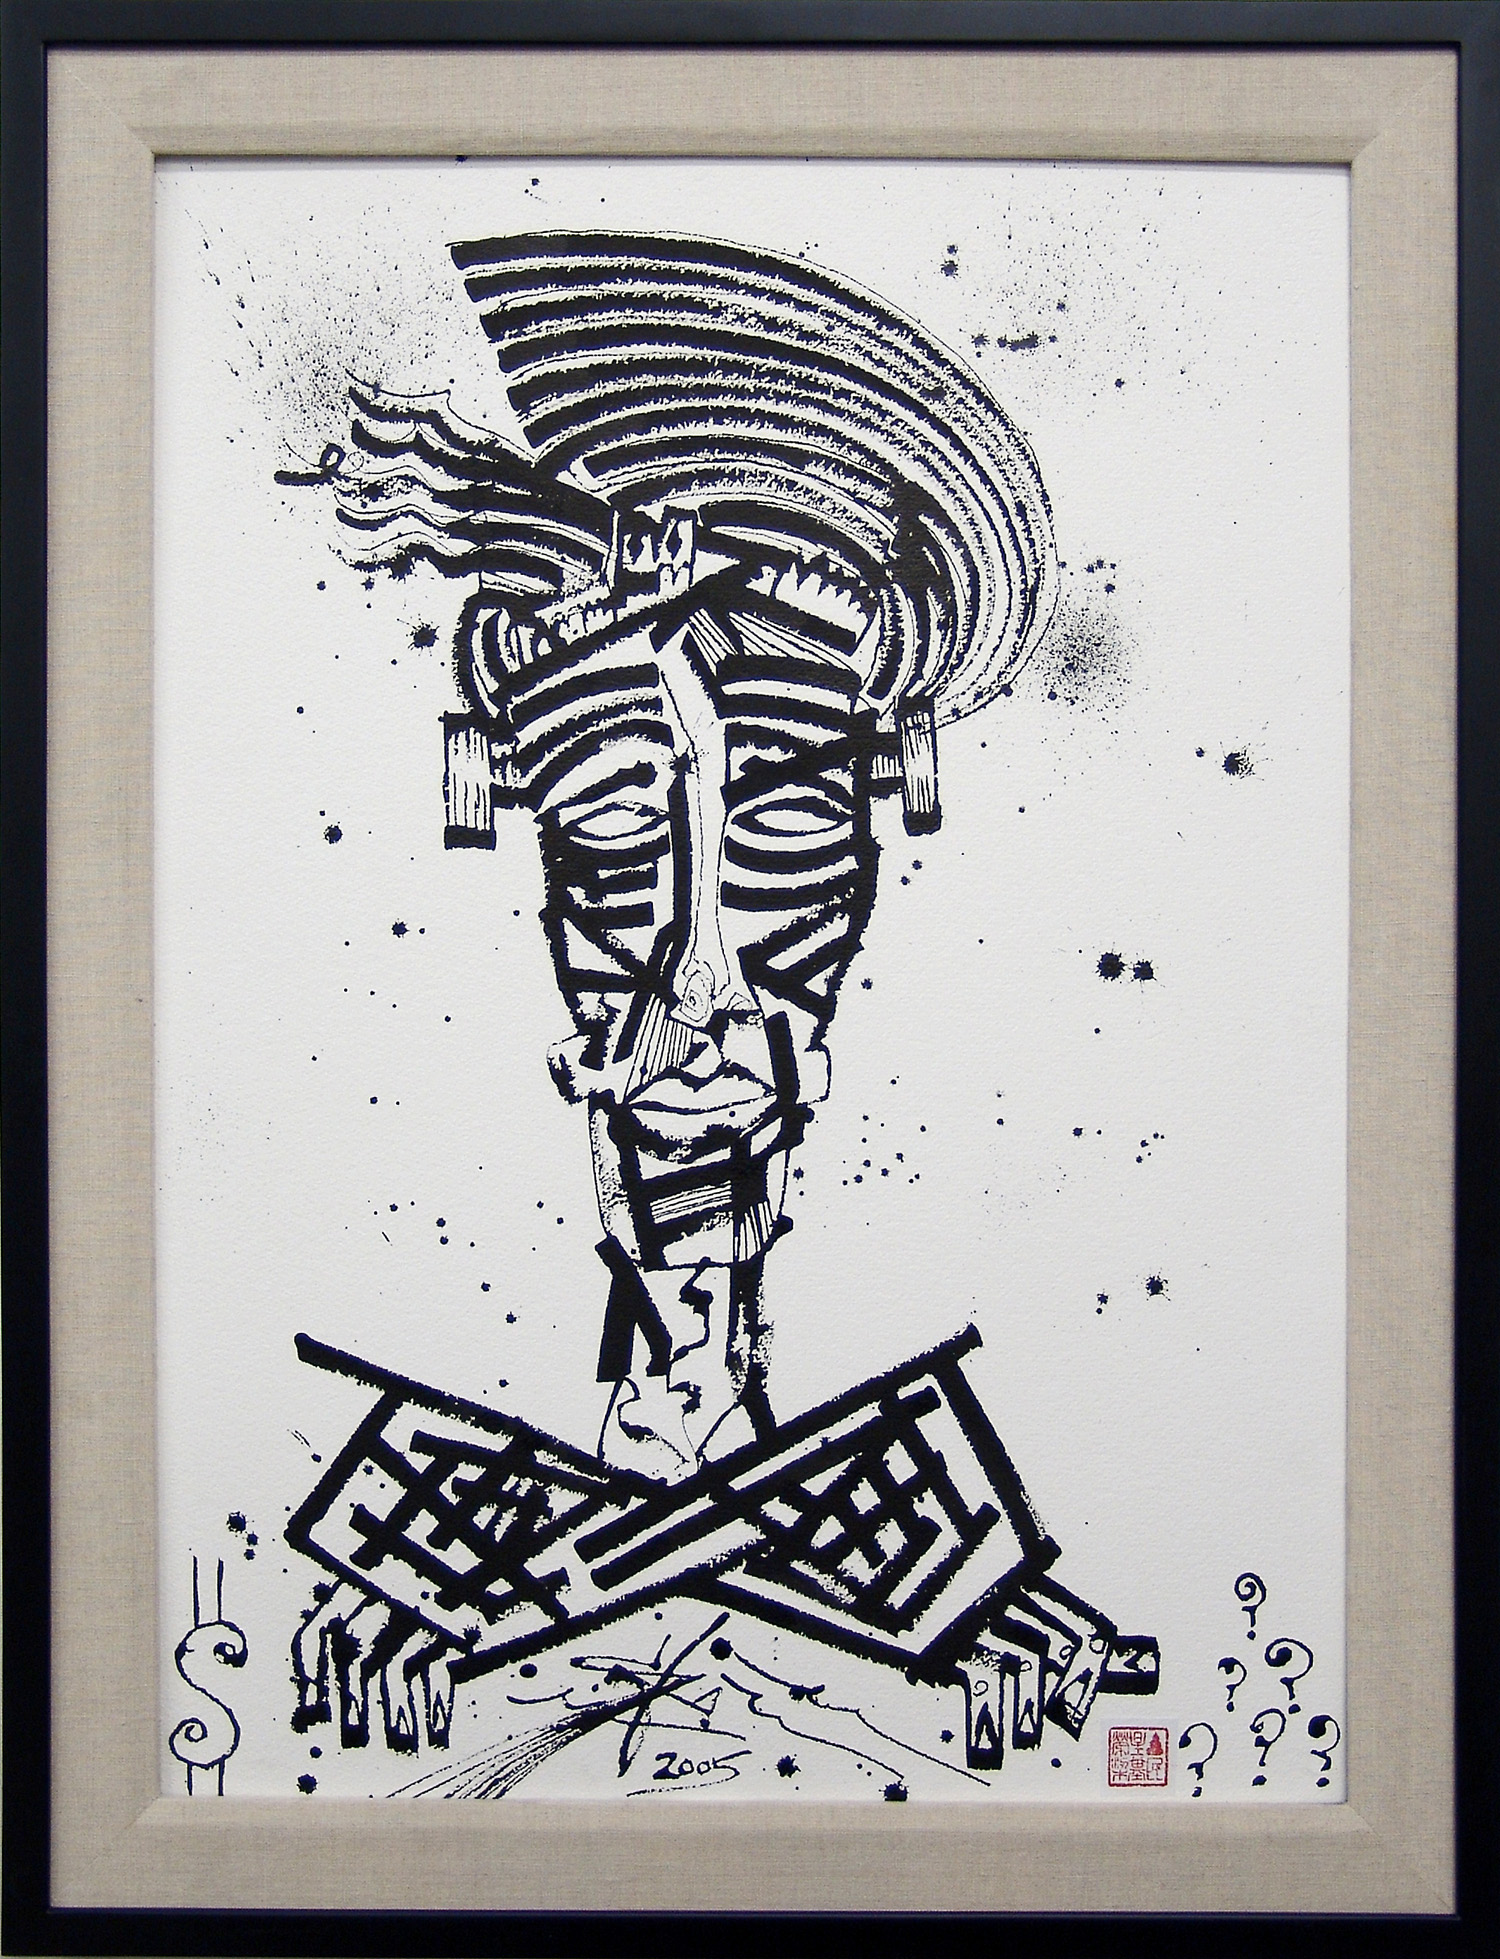  Stoic Frank (3 Shades of Madness), 2005 sumi ink on paper 30 x 22 inch 